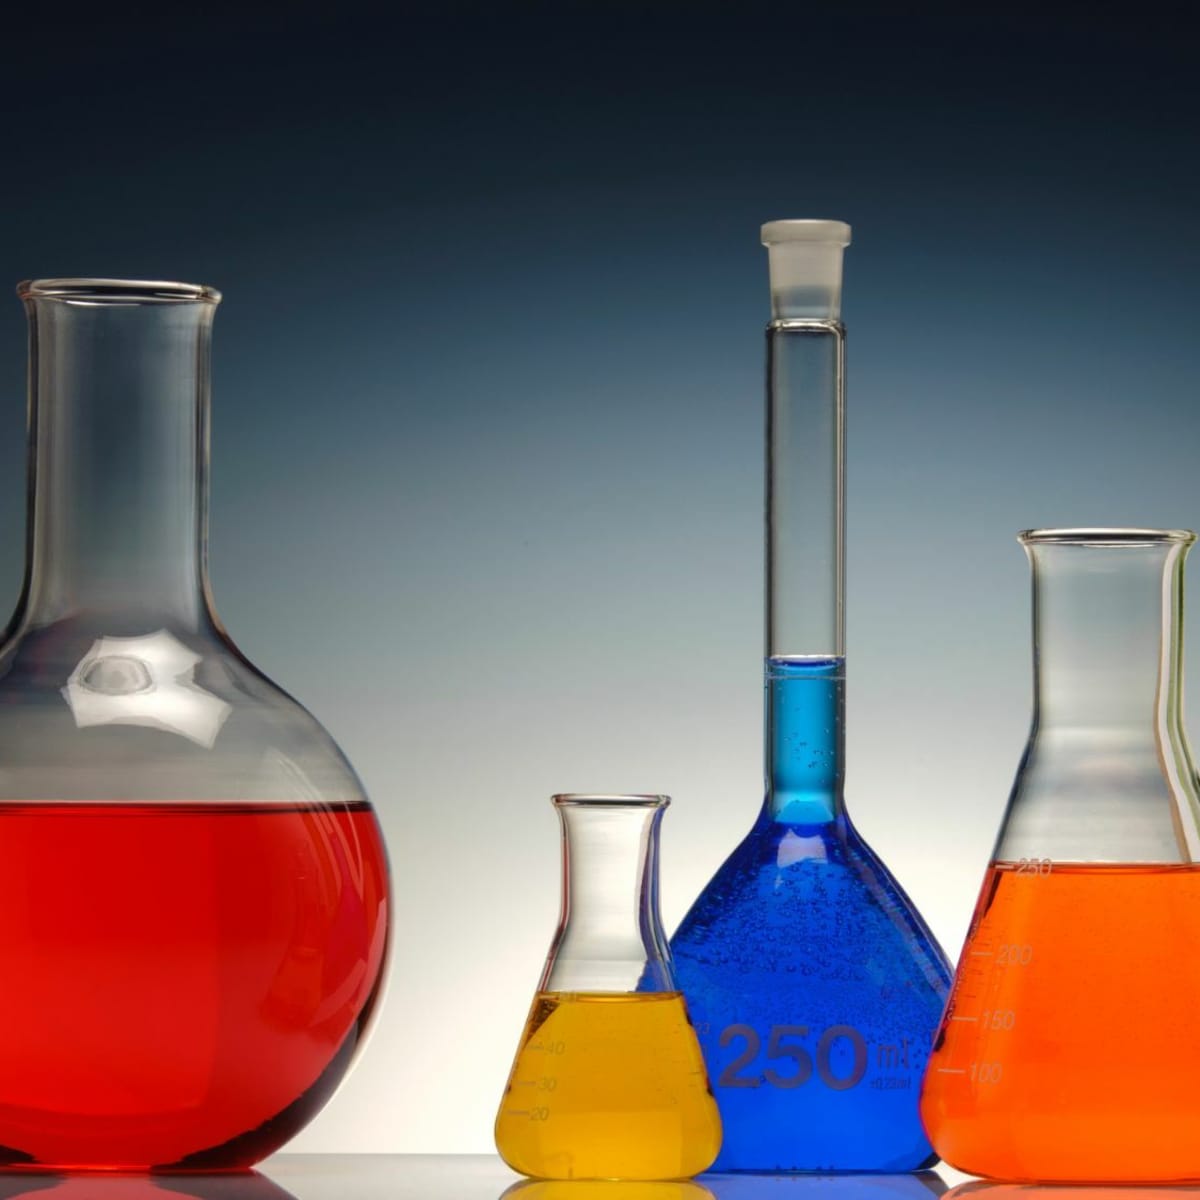 A List of Chemistry Laboratory Apparatus and Their Uses - Owlcation